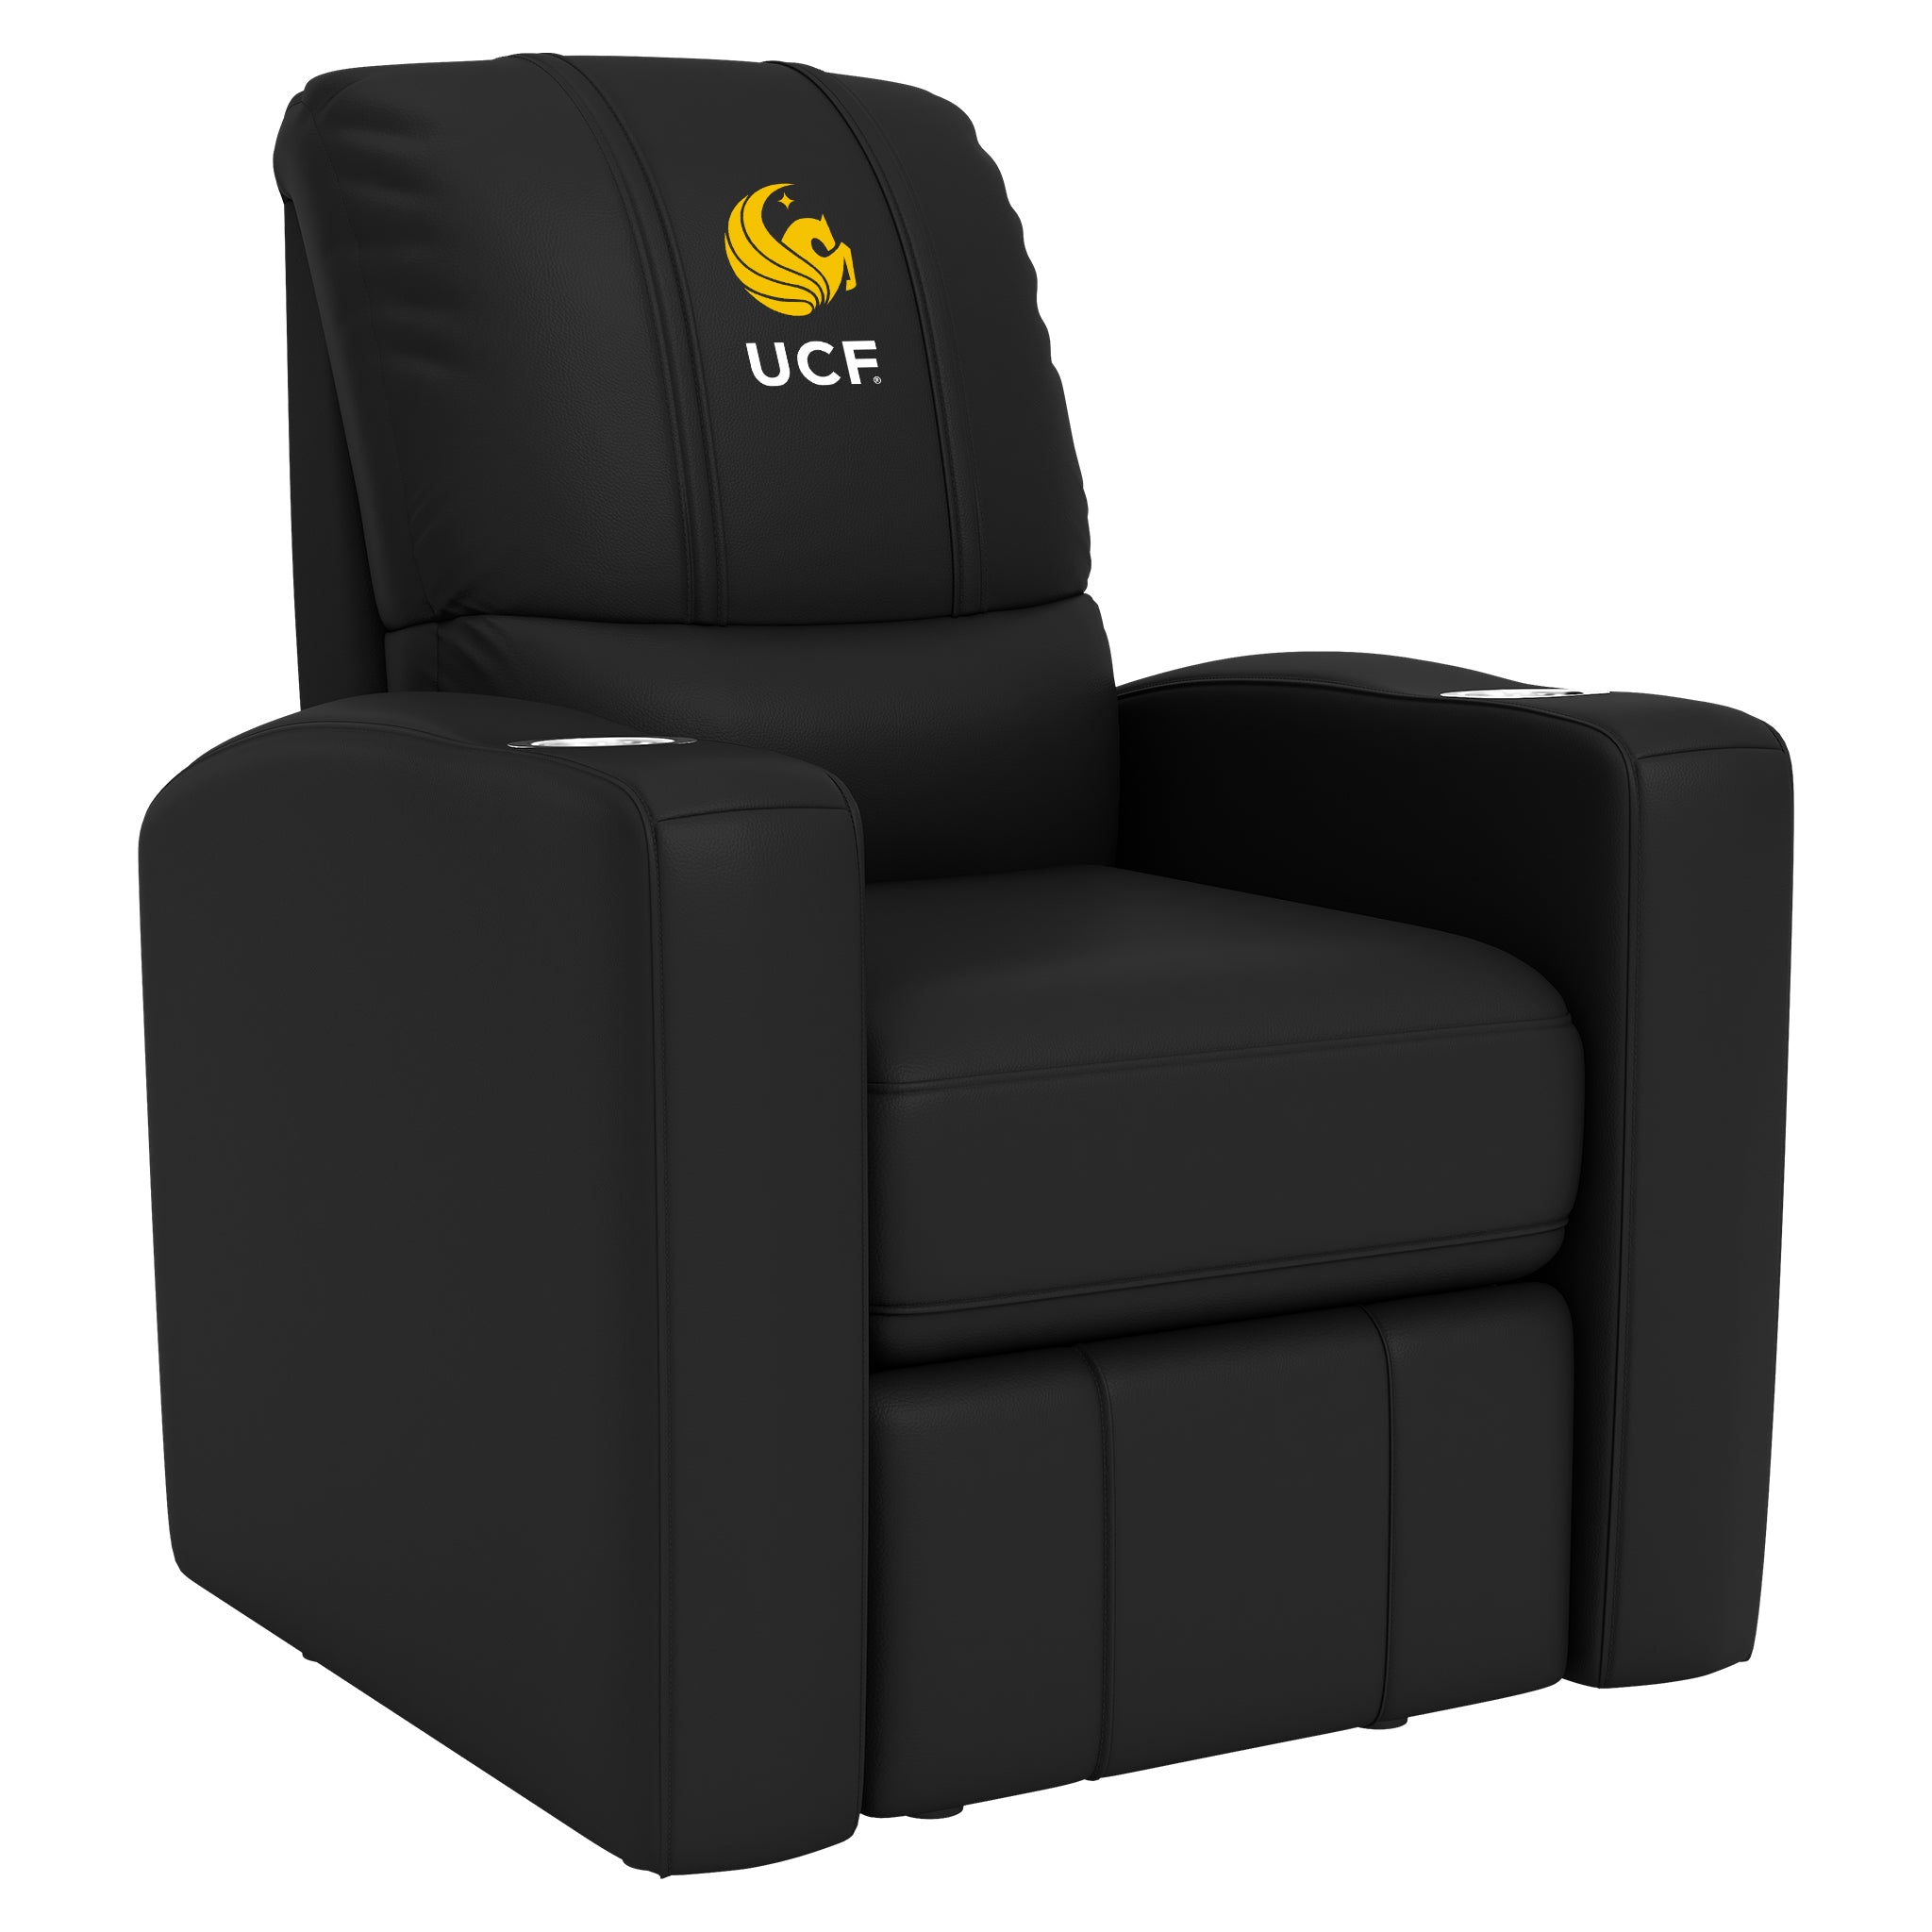 UCF Stealth Recliner Central Florida UCF Knights with Alumi Logo